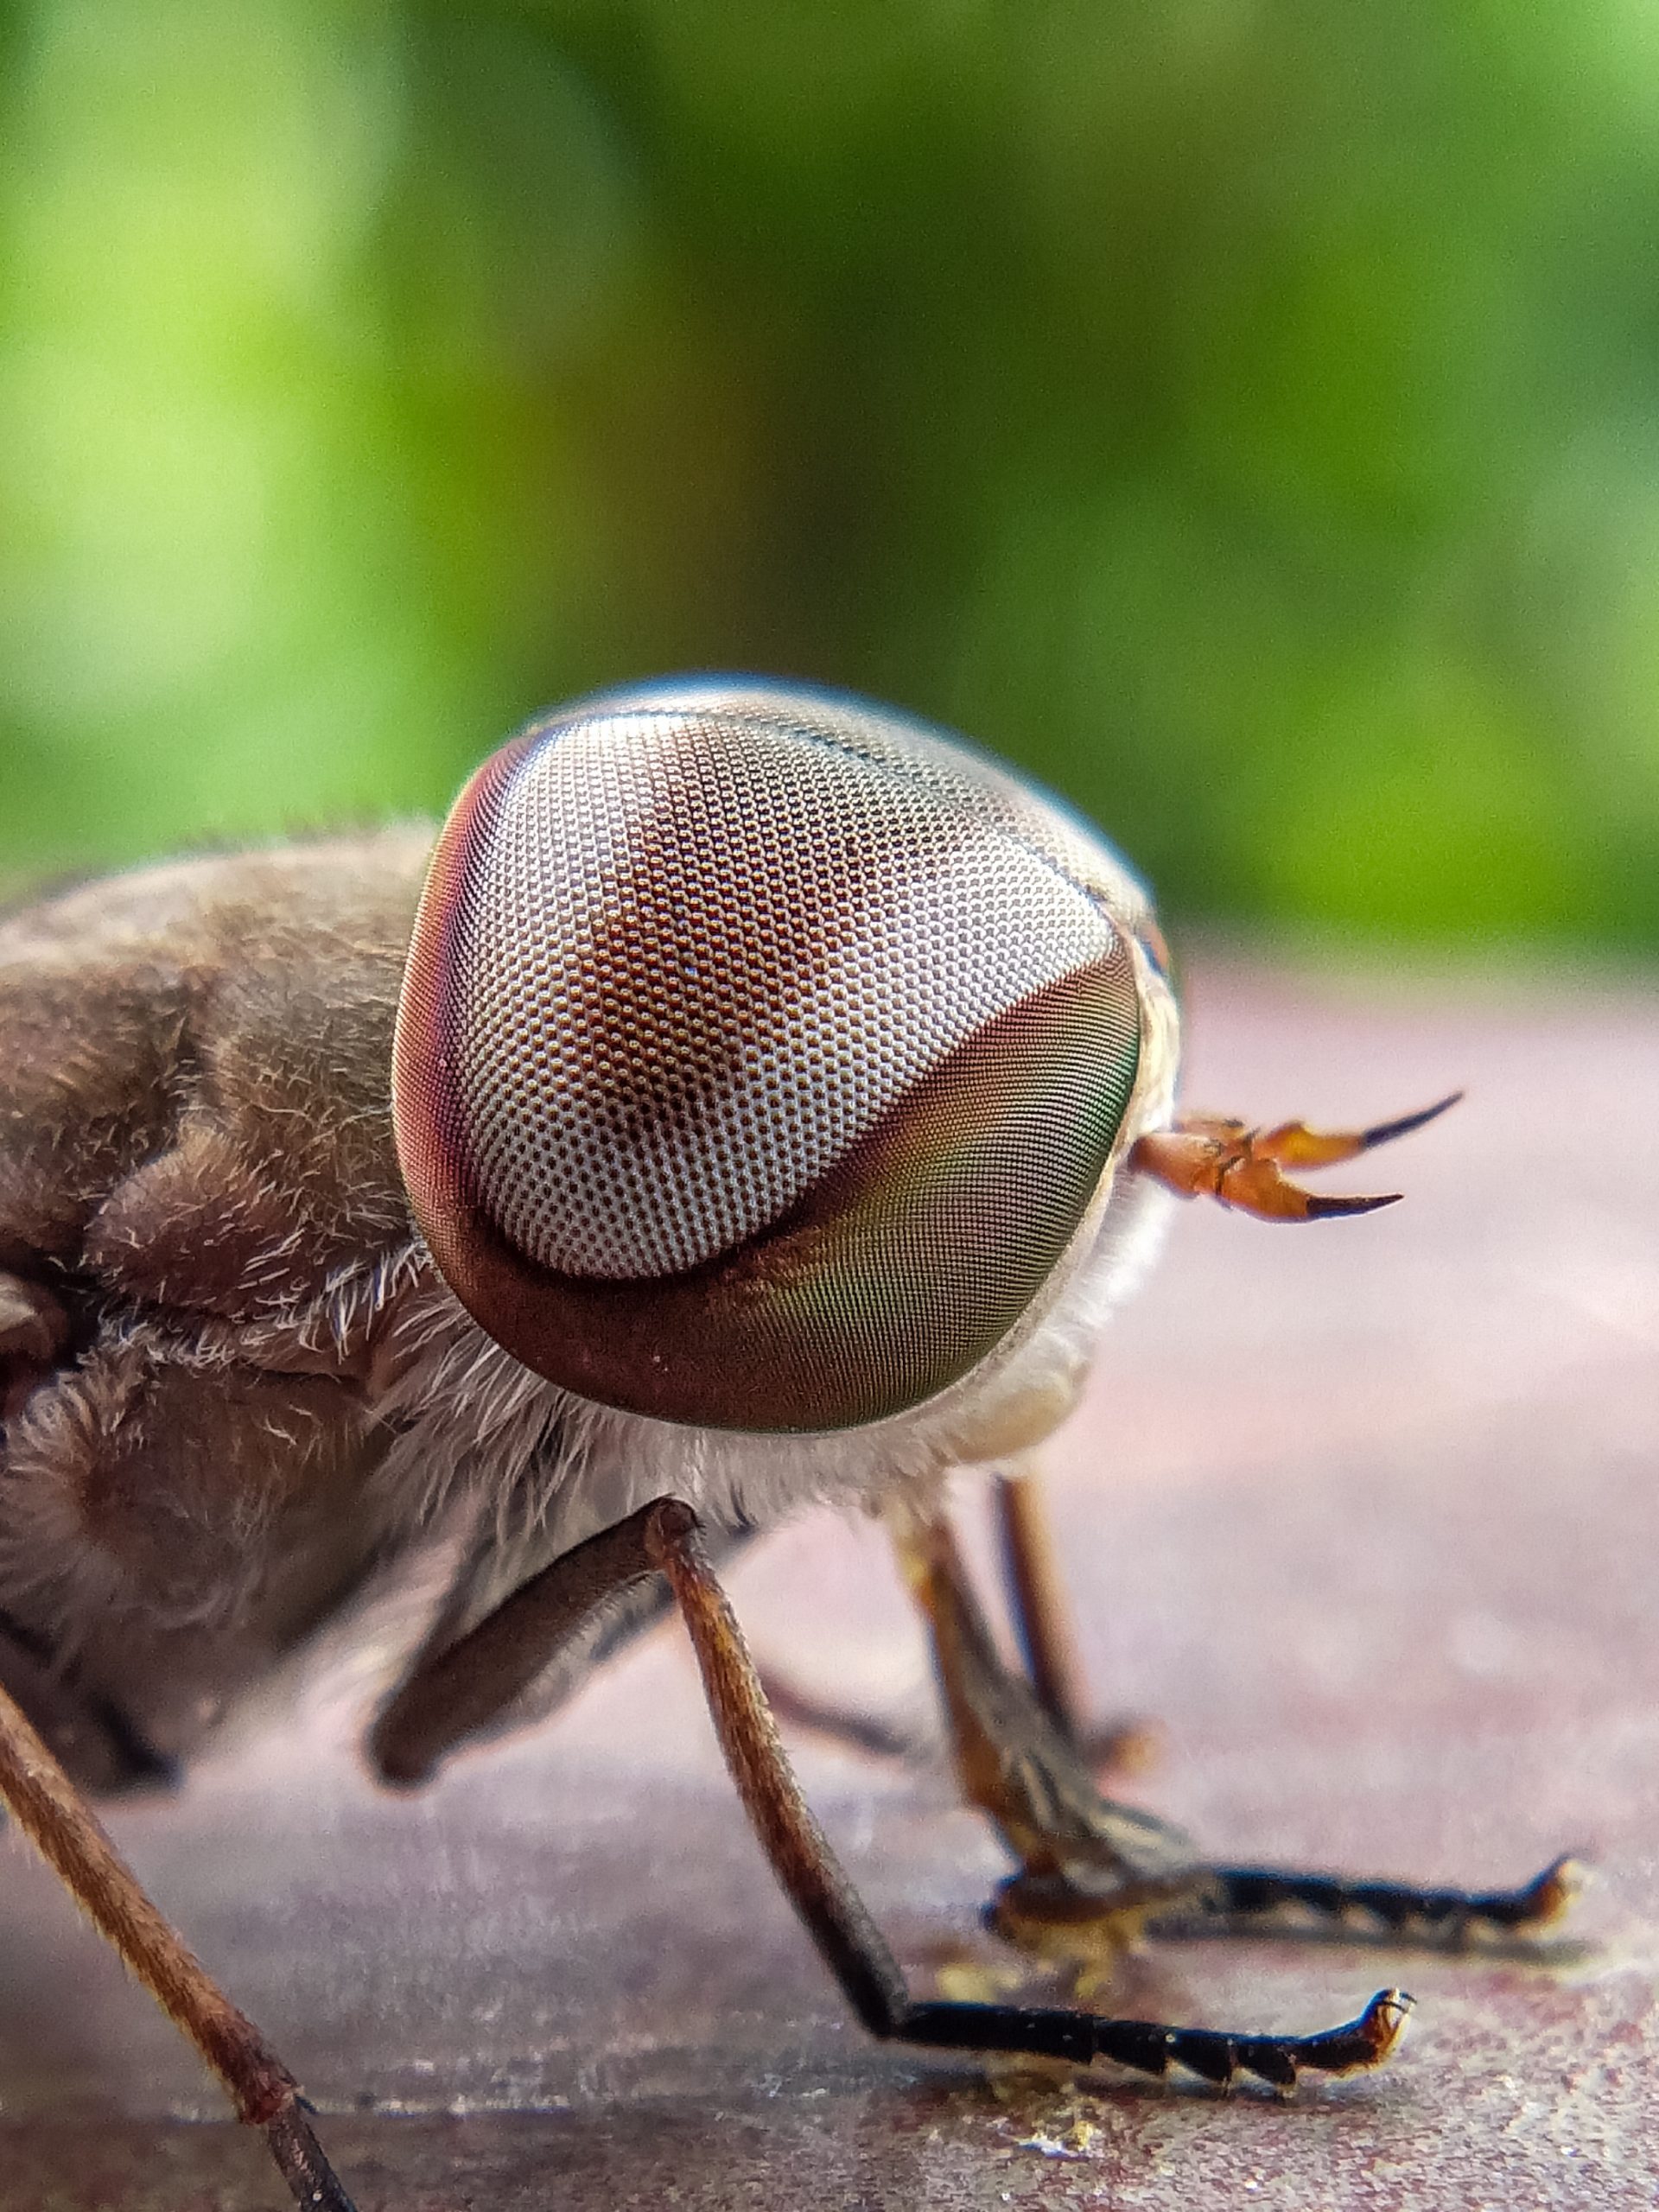 Eye of an insect